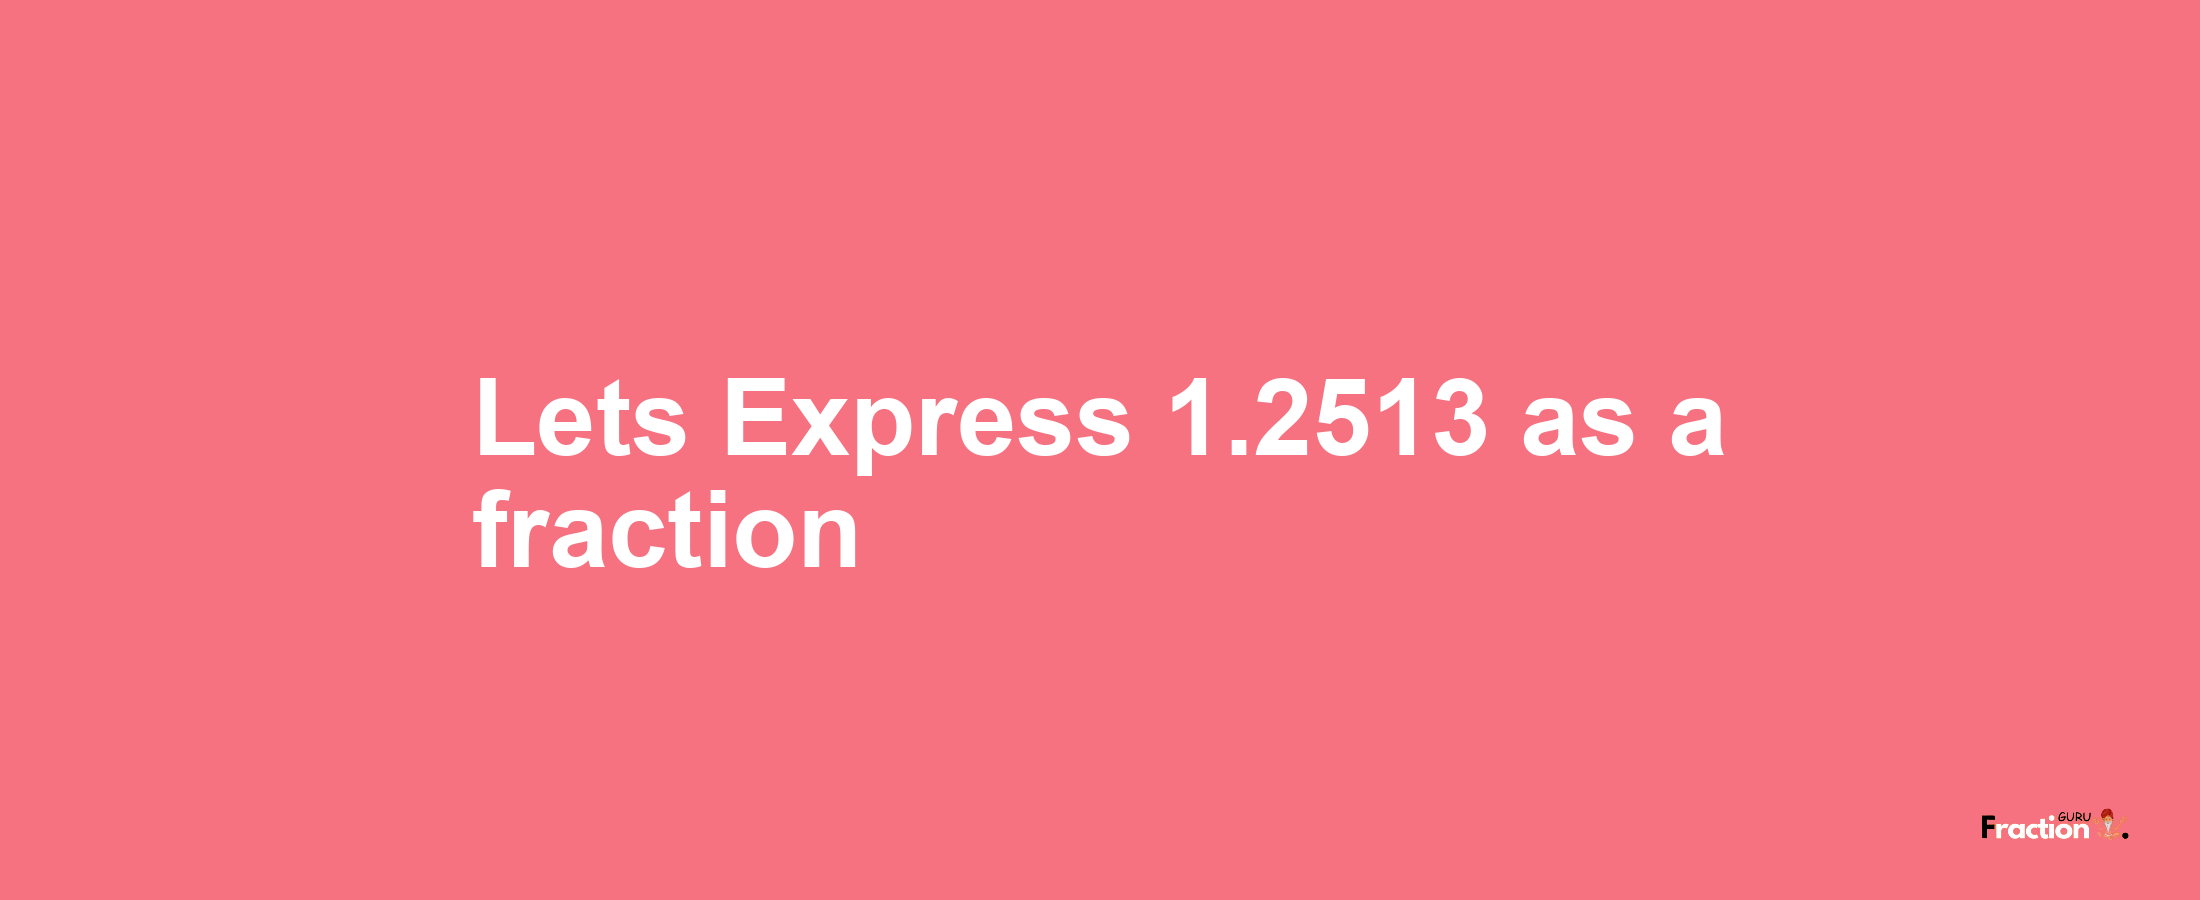 Lets Express 1.2513 as afraction